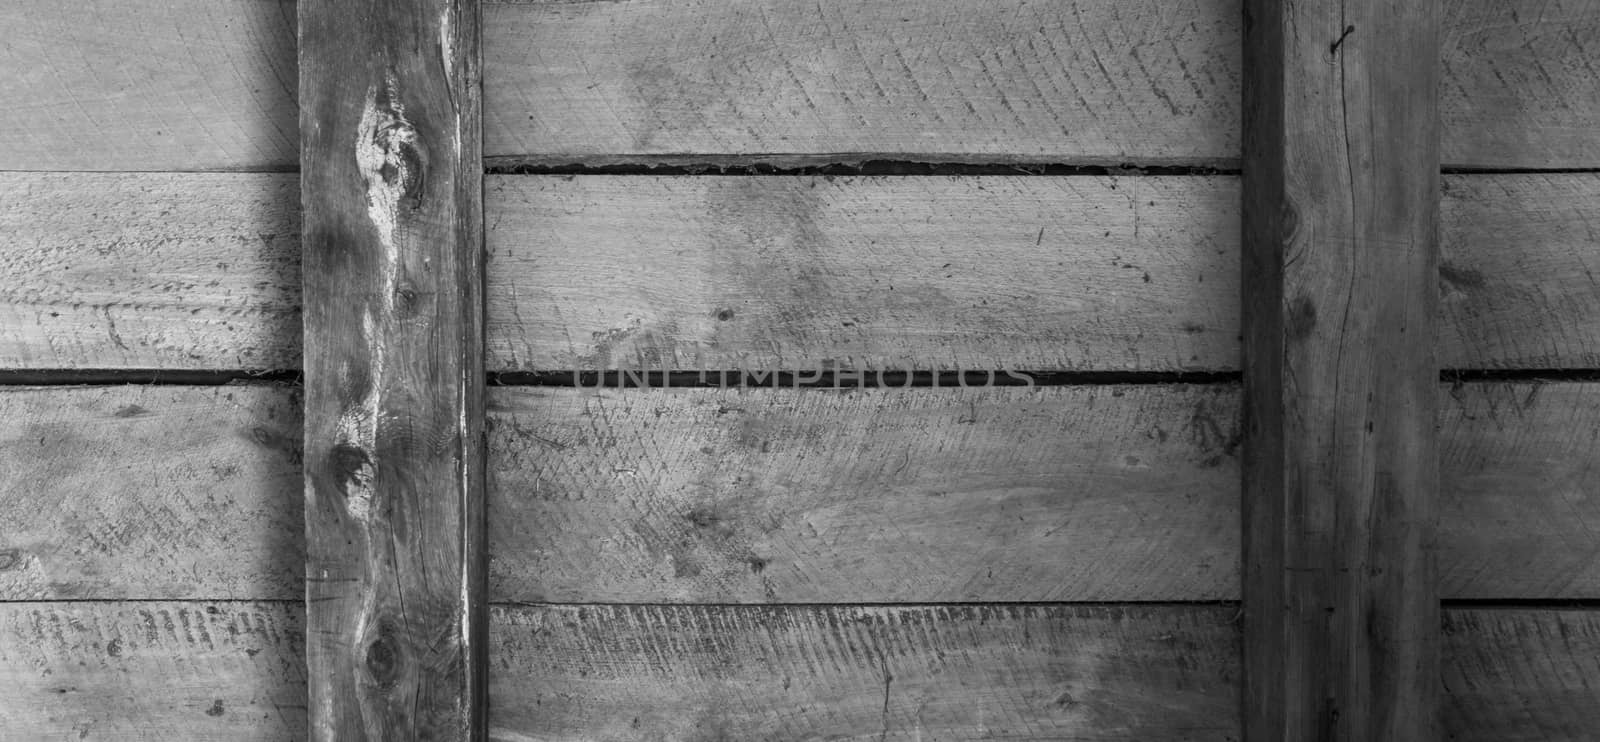 Four wooden boards inside an old outbuilding twobeams and horizontal arrangement